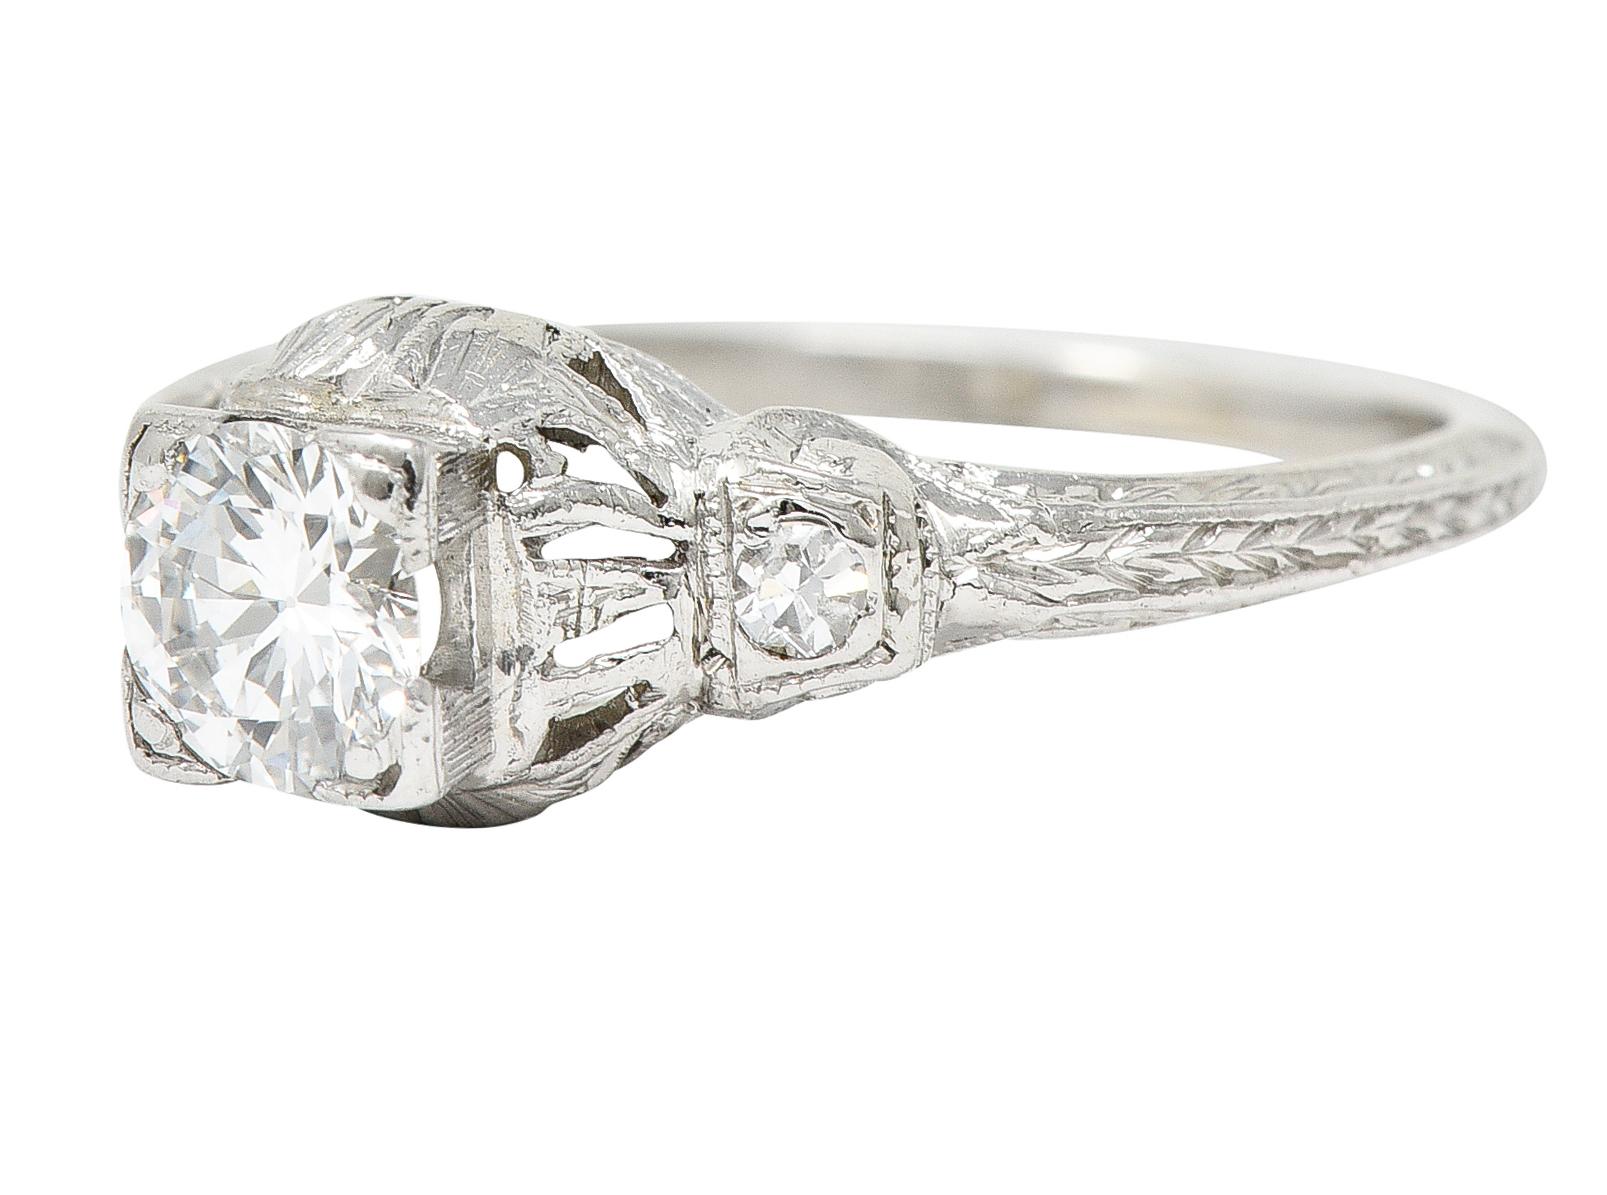 Maurice Tishman Art Deco 0.40 Carat Diamond Platinum Scrolled Engagement Ring In Excellent Condition For Sale In Philadelphia, PA